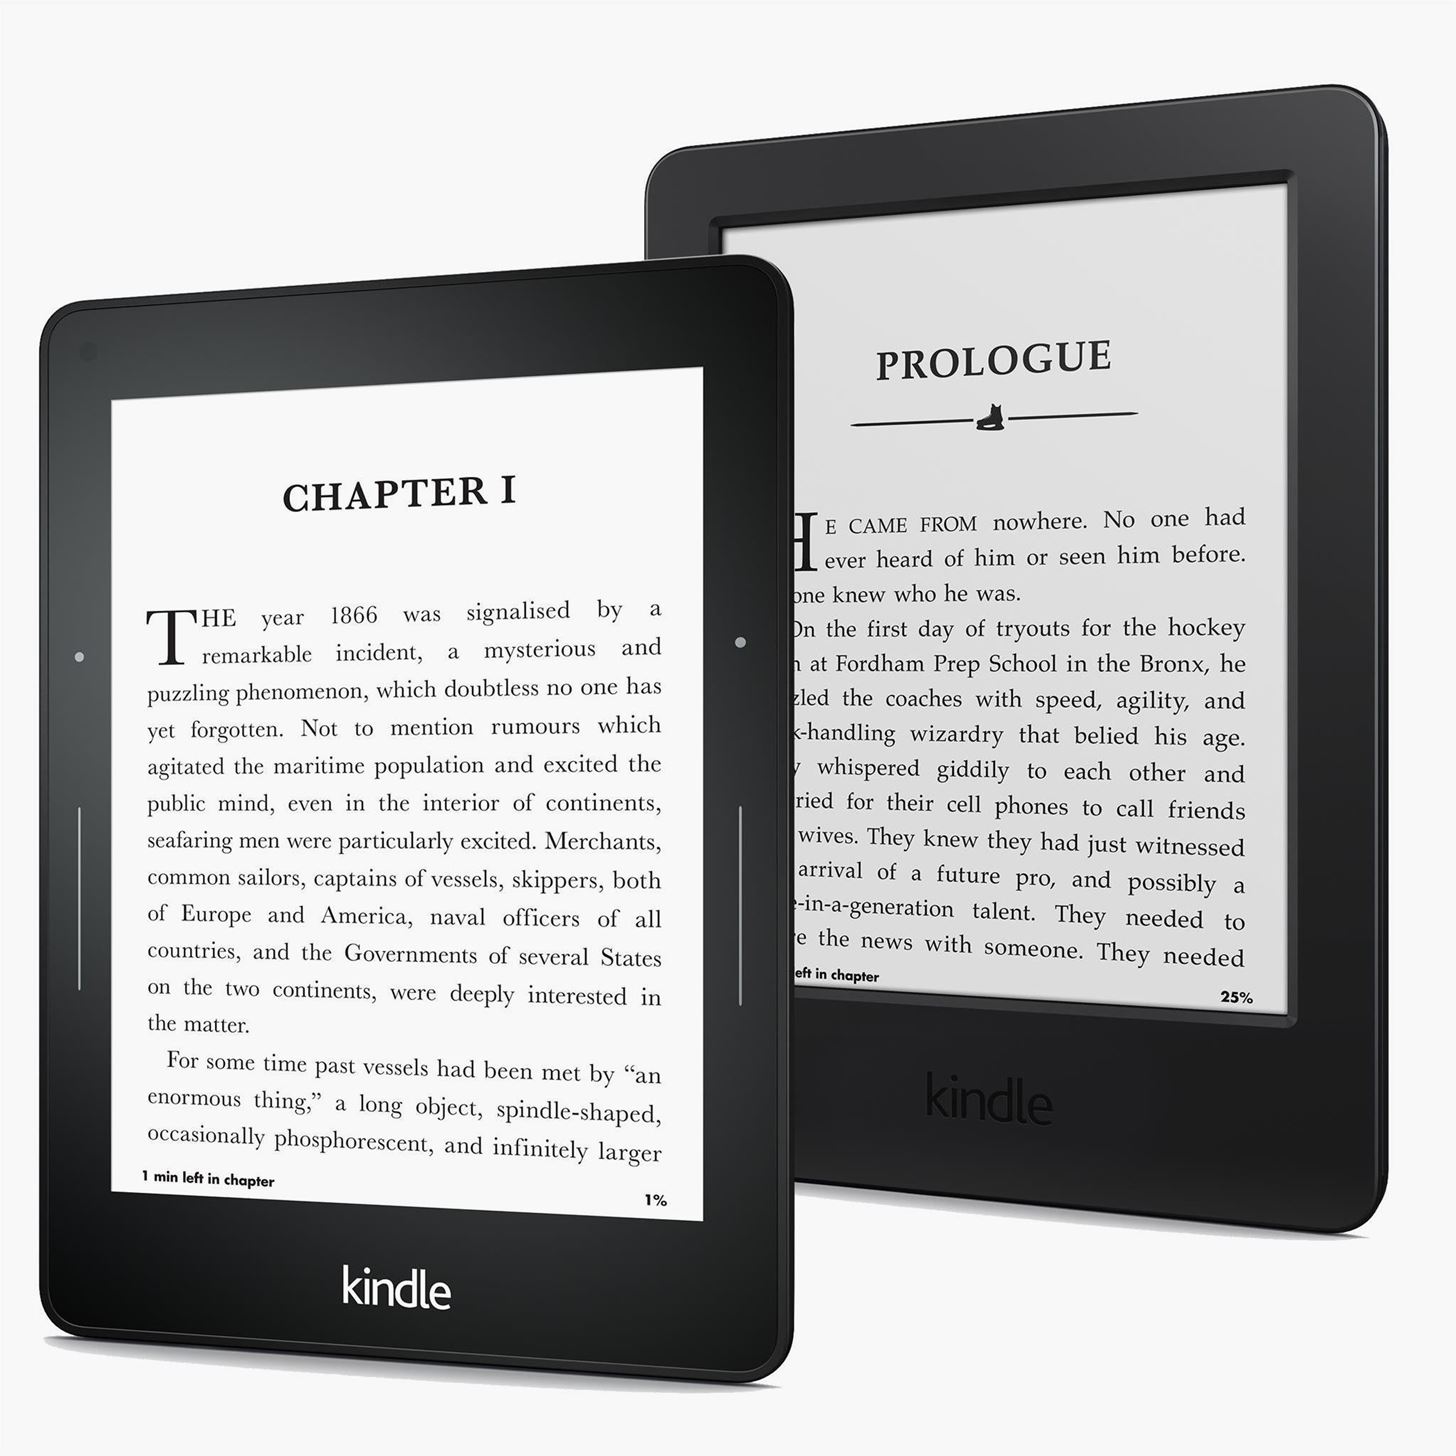 Urgent: If You Own an Older Kindle, You Must Do This Immediately